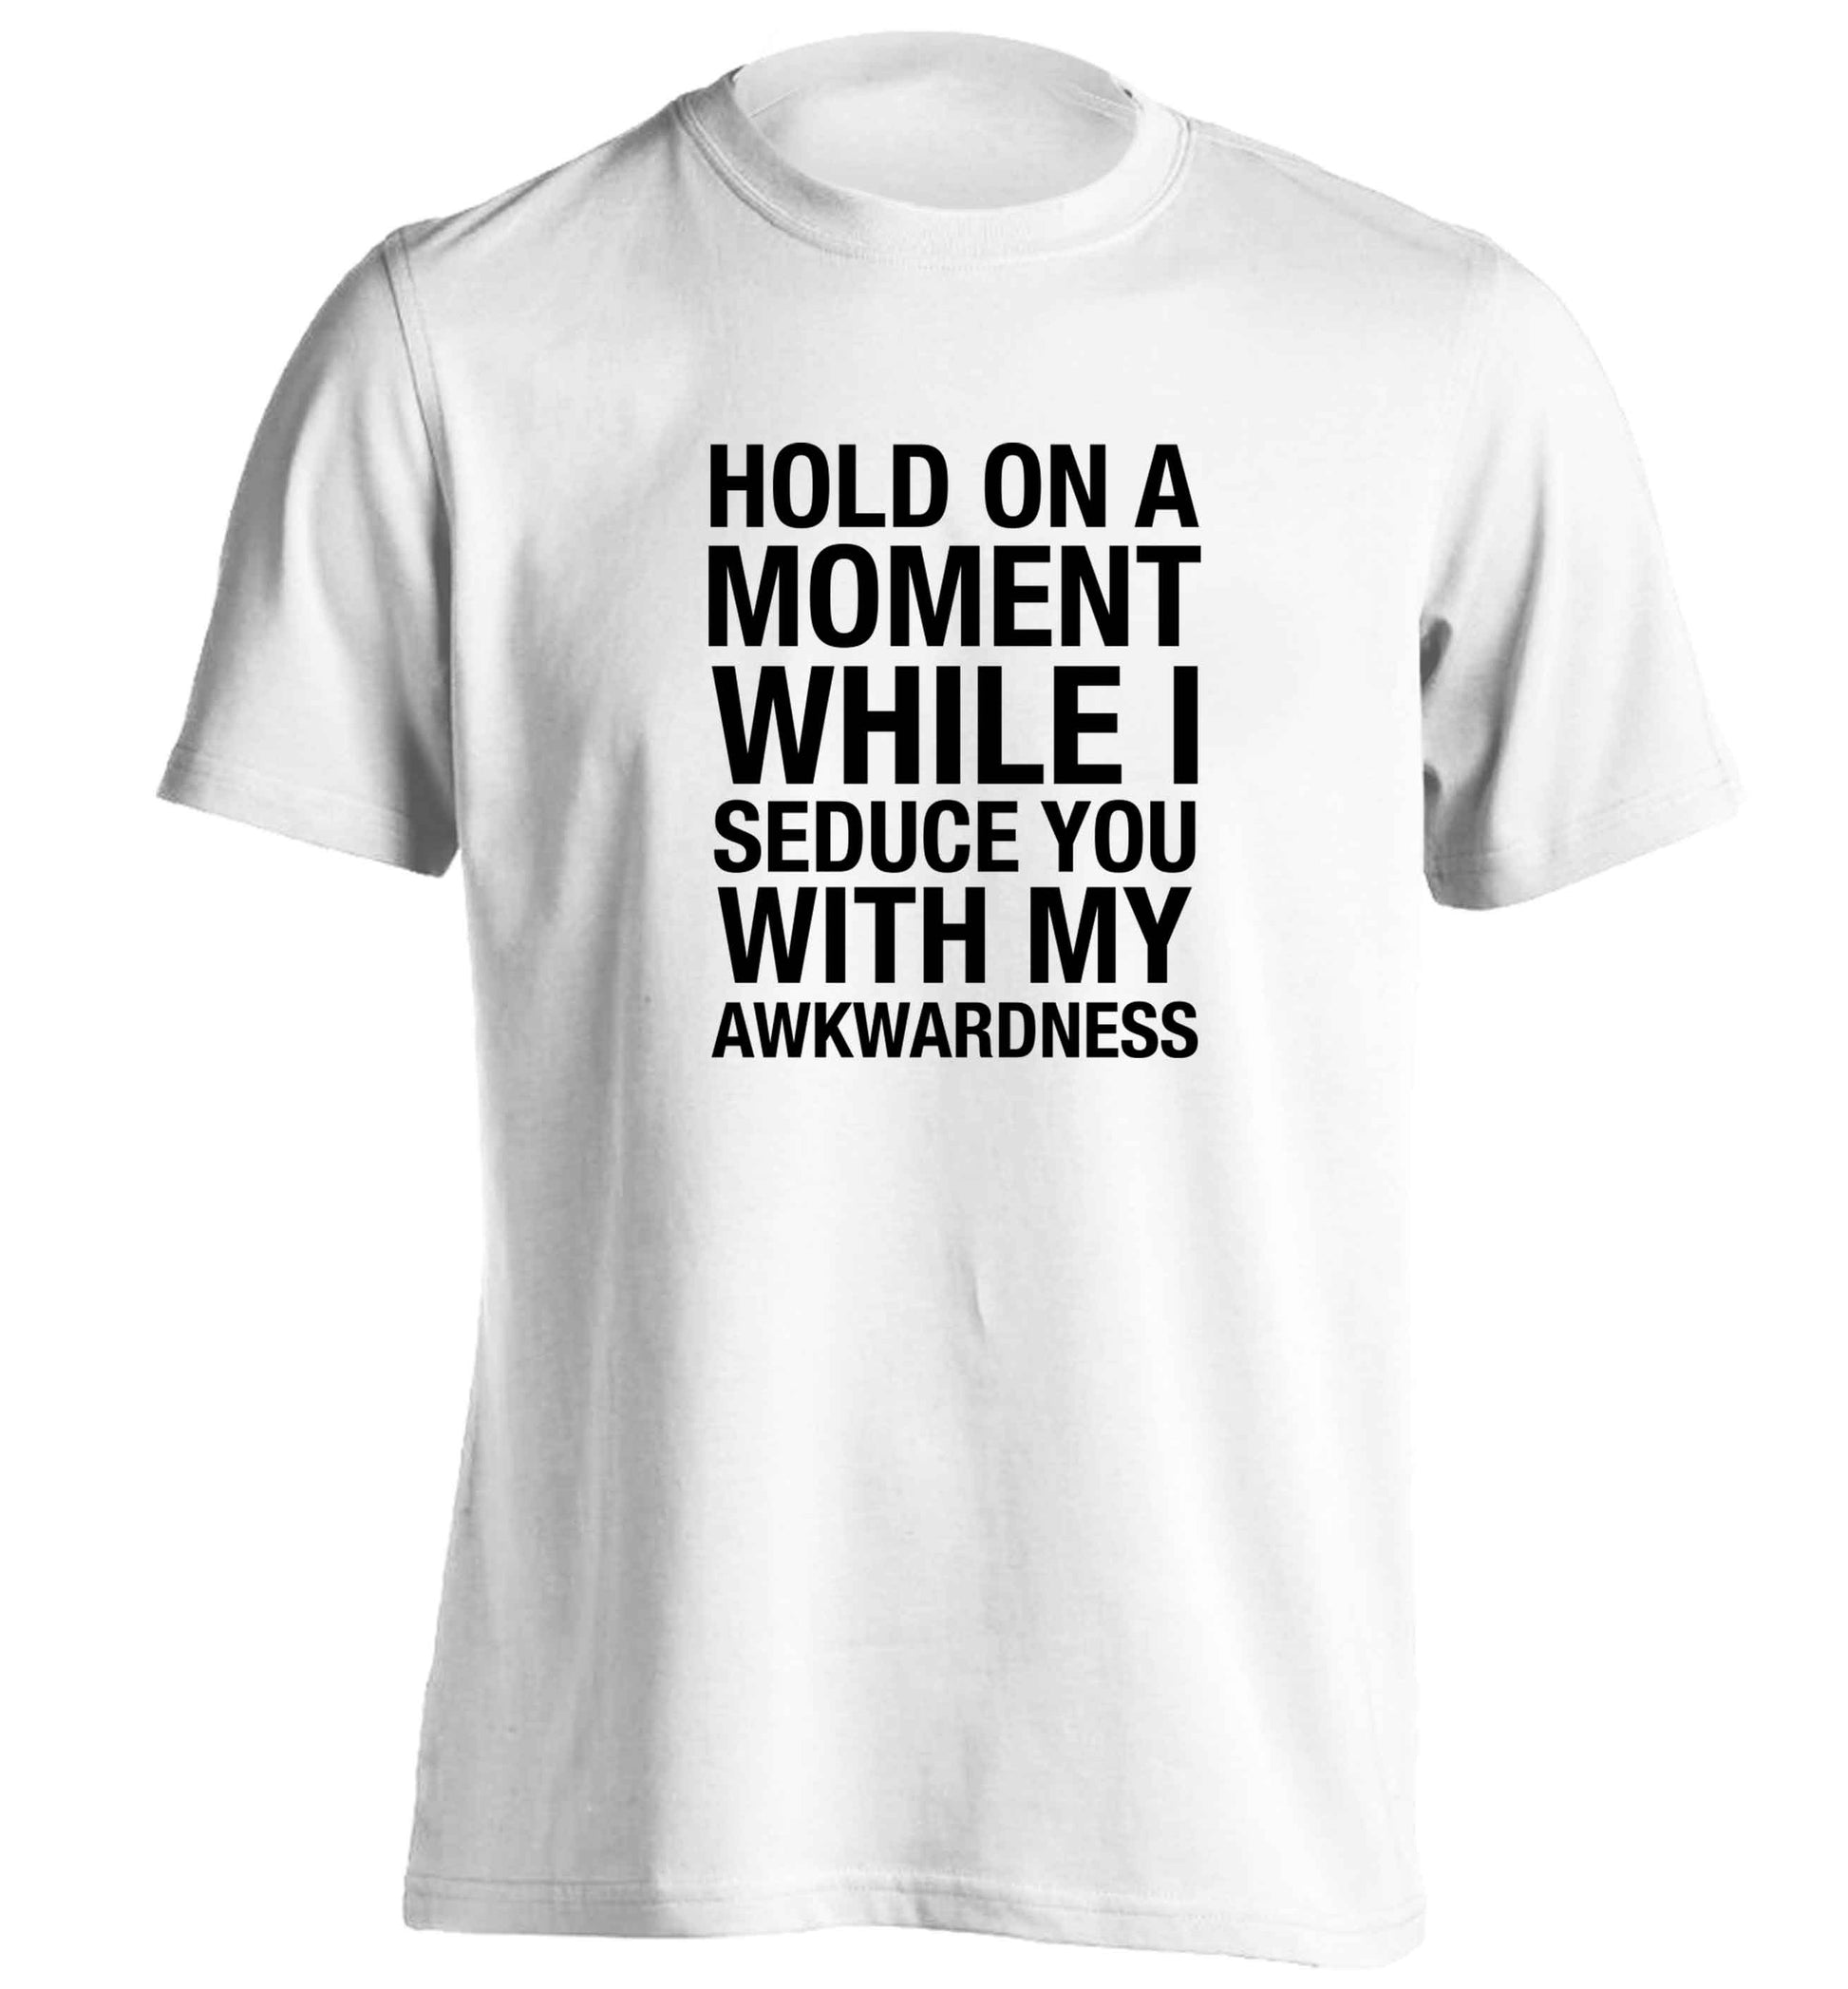 Hold on a moment while I seduce you with my awkwardness adults unisex white Tshirt 2XL